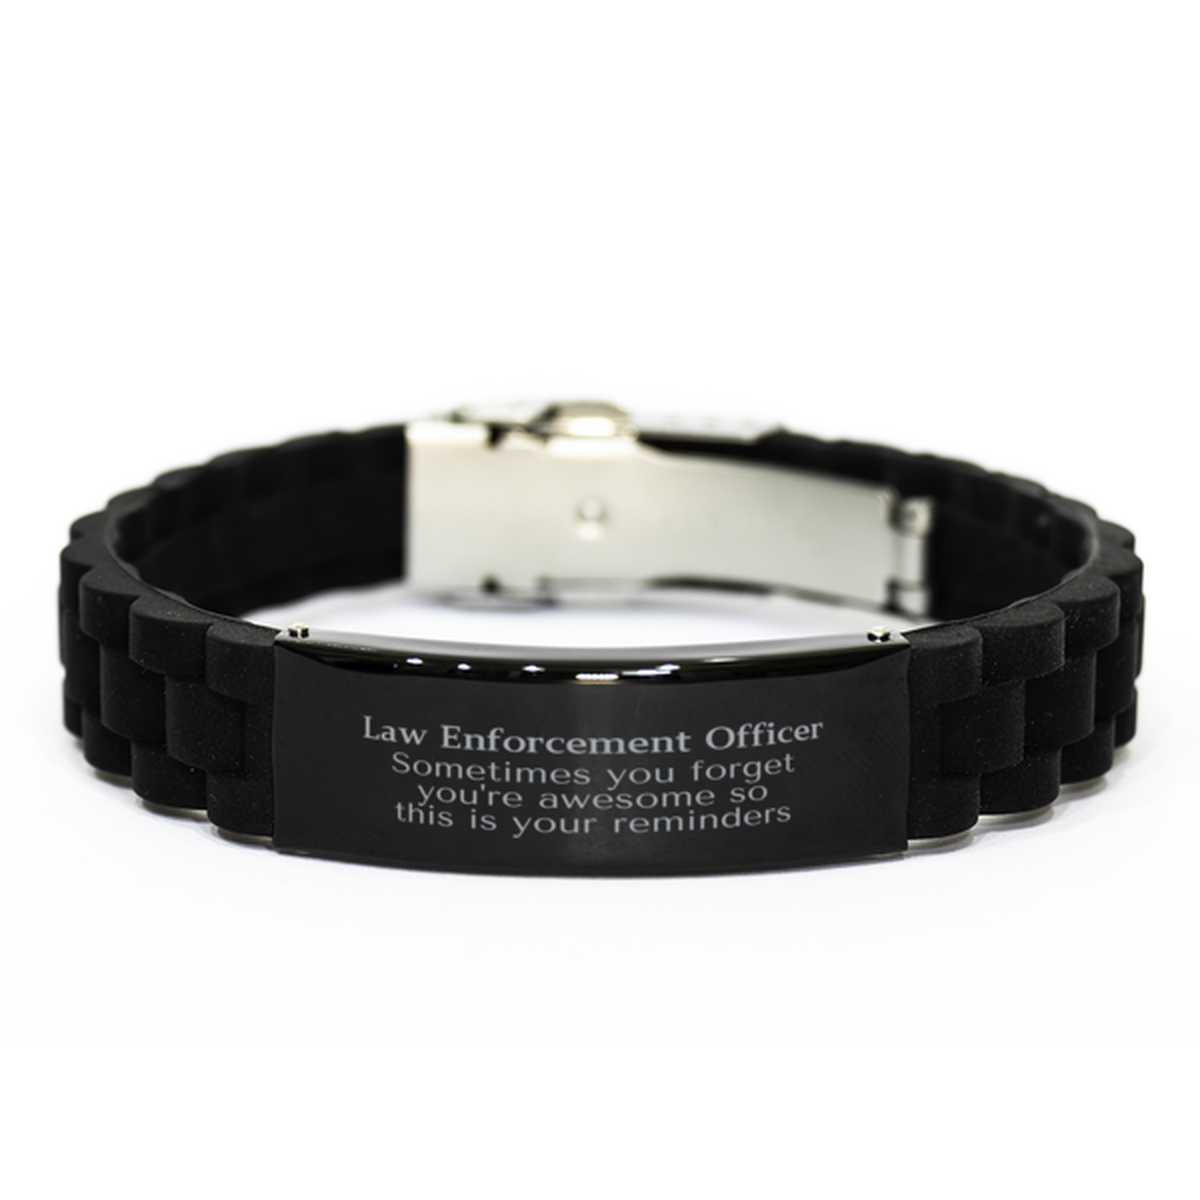 Sentimental Law Enforcement Officer Black Glidelock Clasp Bracelet, Law Enforcement Officer Sometimes you forget you're awesome so this is your reminders, Graduation Christmas Birthday Gifts for Law Enforcement Officer, Men, Women, Coworkers